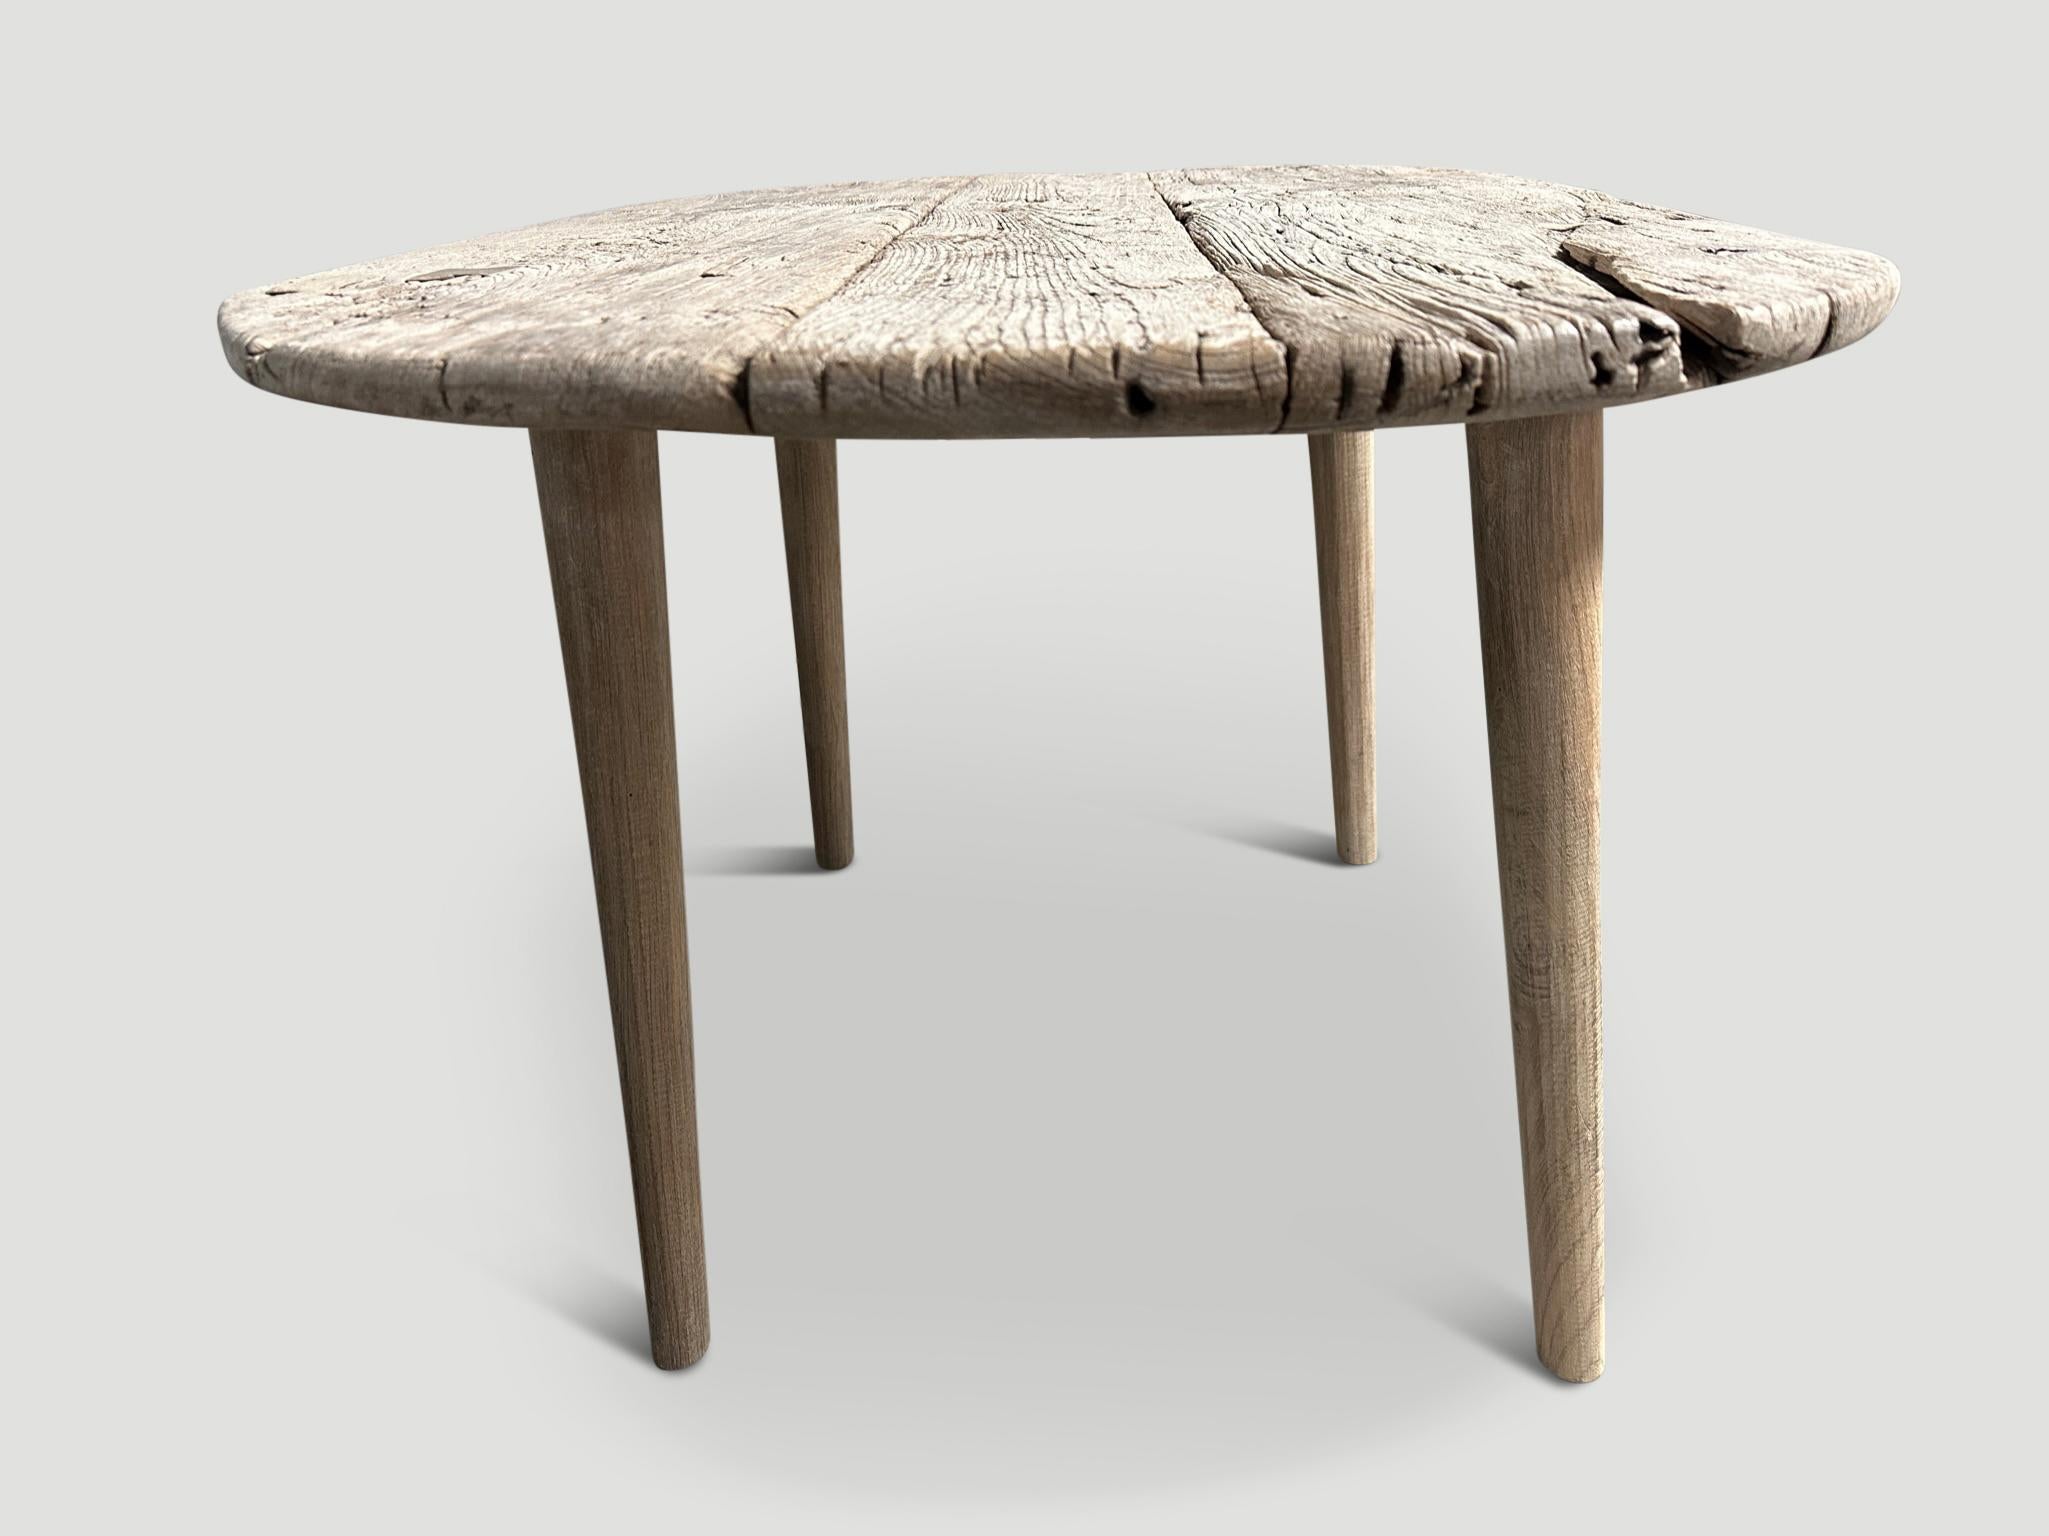 Andrianna Shamaris Wabi Sabi Teak Wood Table In Excellent Condition For Sale In New York, NY